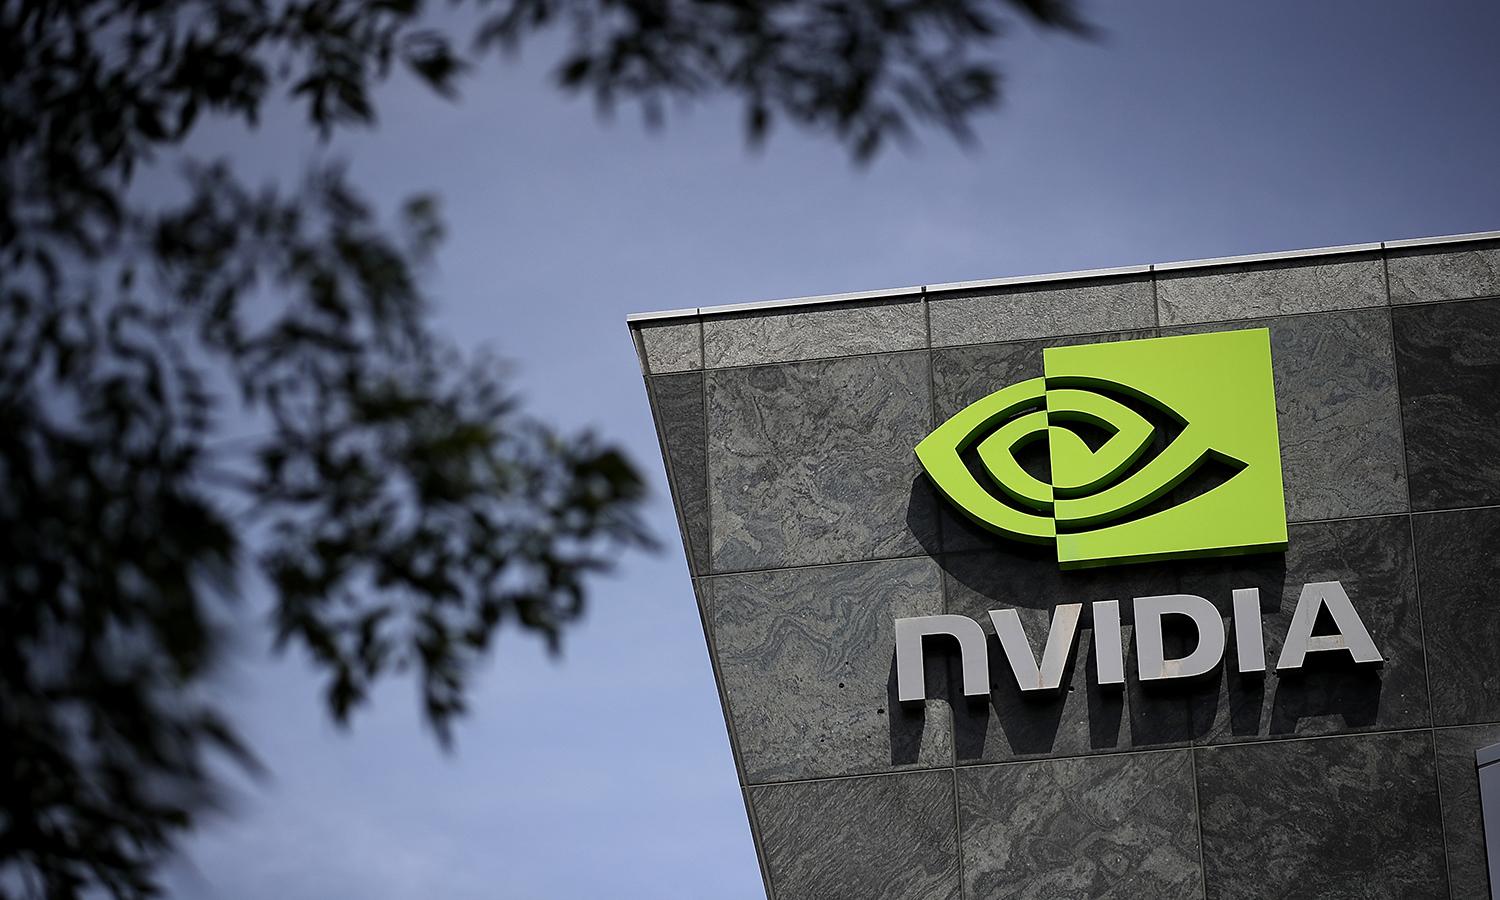 Employee credentials and Nvidia information was leaked online Tuesday after the chip maker was breached. Pictured: A sign is seen at the Nvidia headquarters on May 10, 2018, in Santa Clara, Calif. (Photo by Justin Sullivan/Getty Images)